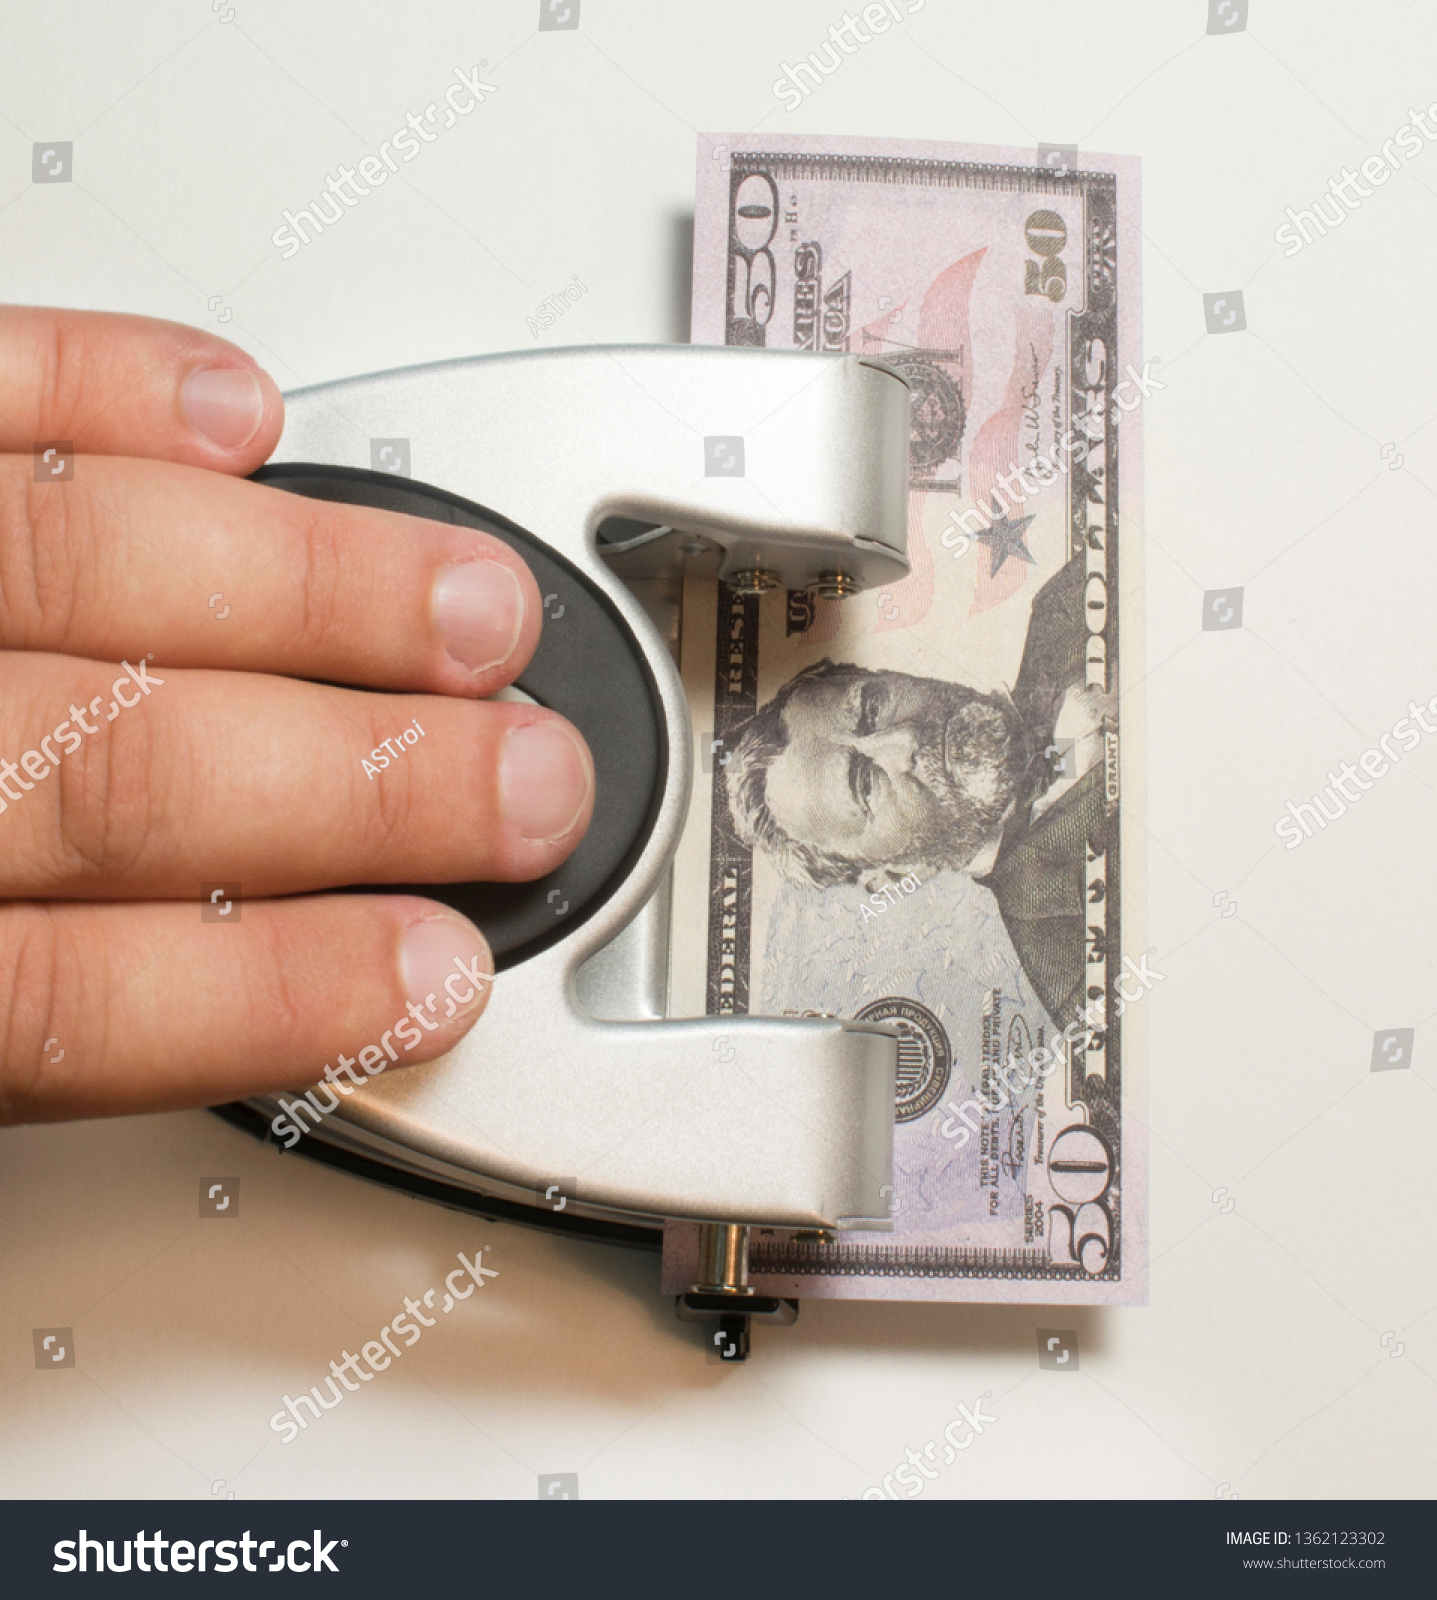 Close - up, the man s hand presses the hole in which the bill is. The close - up, the man s hand presses the hole in which the bill is invested 50 #1362123302